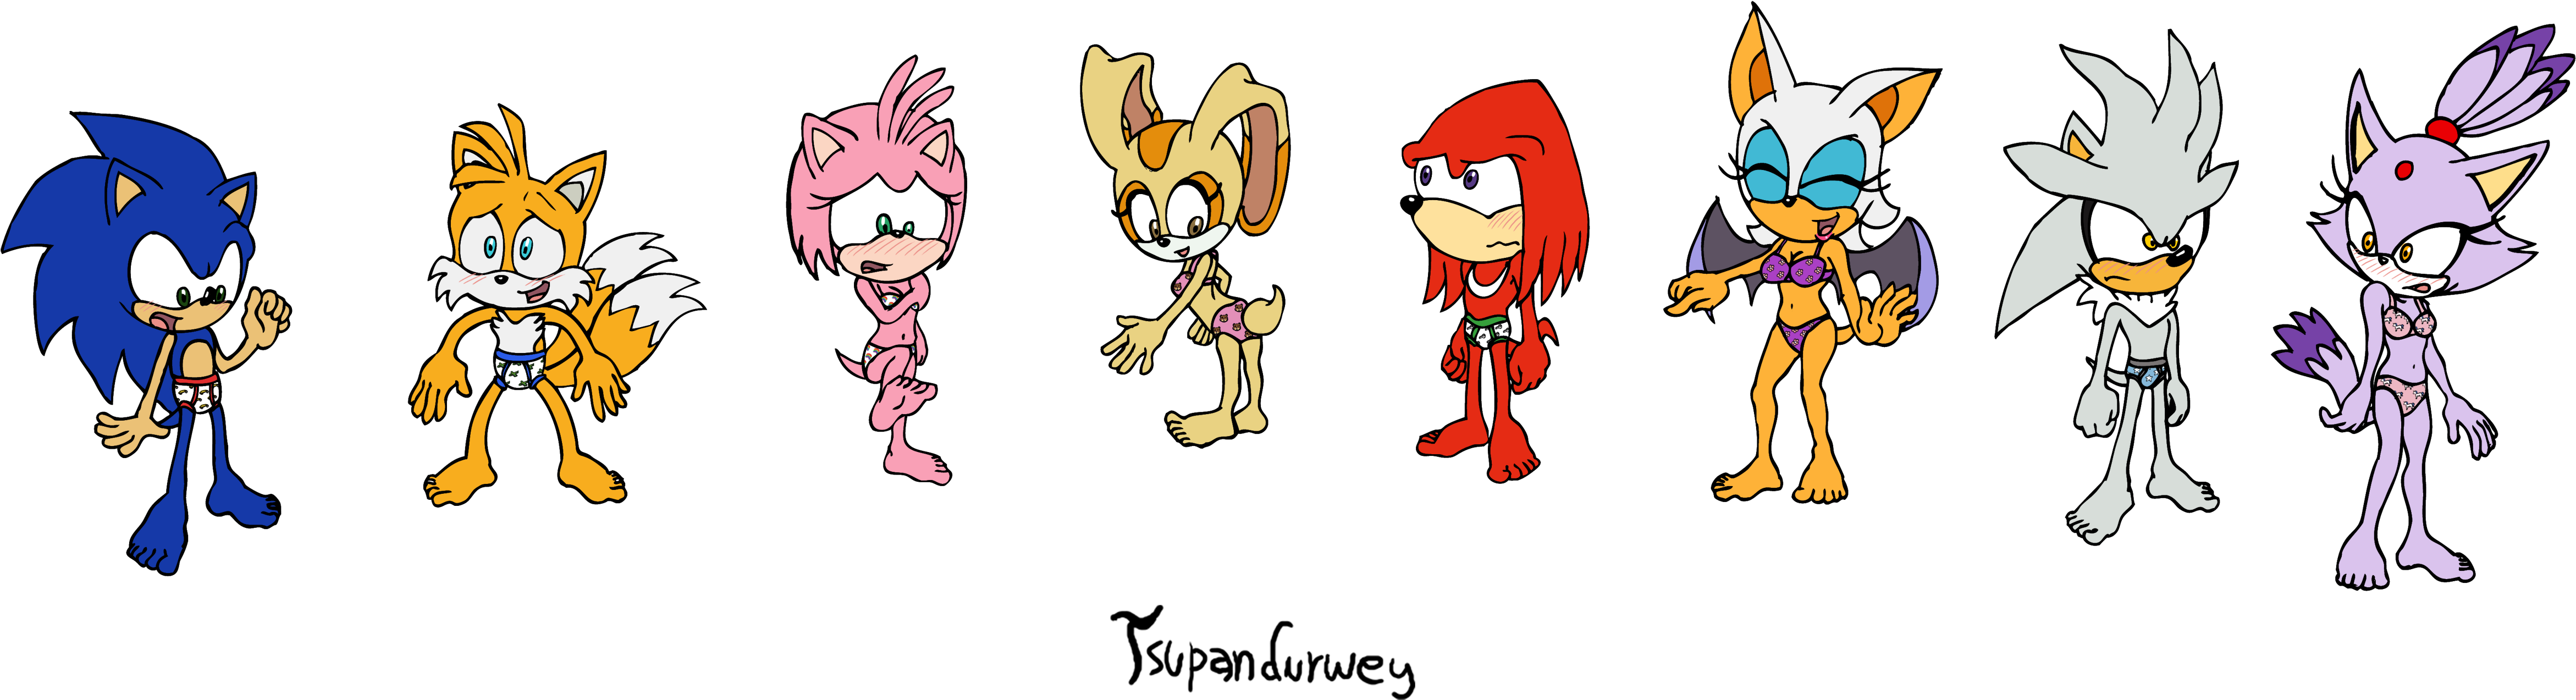 Sonic And Co In Kids Underpants By Tsupy - Sonic Panties (5000x1509)